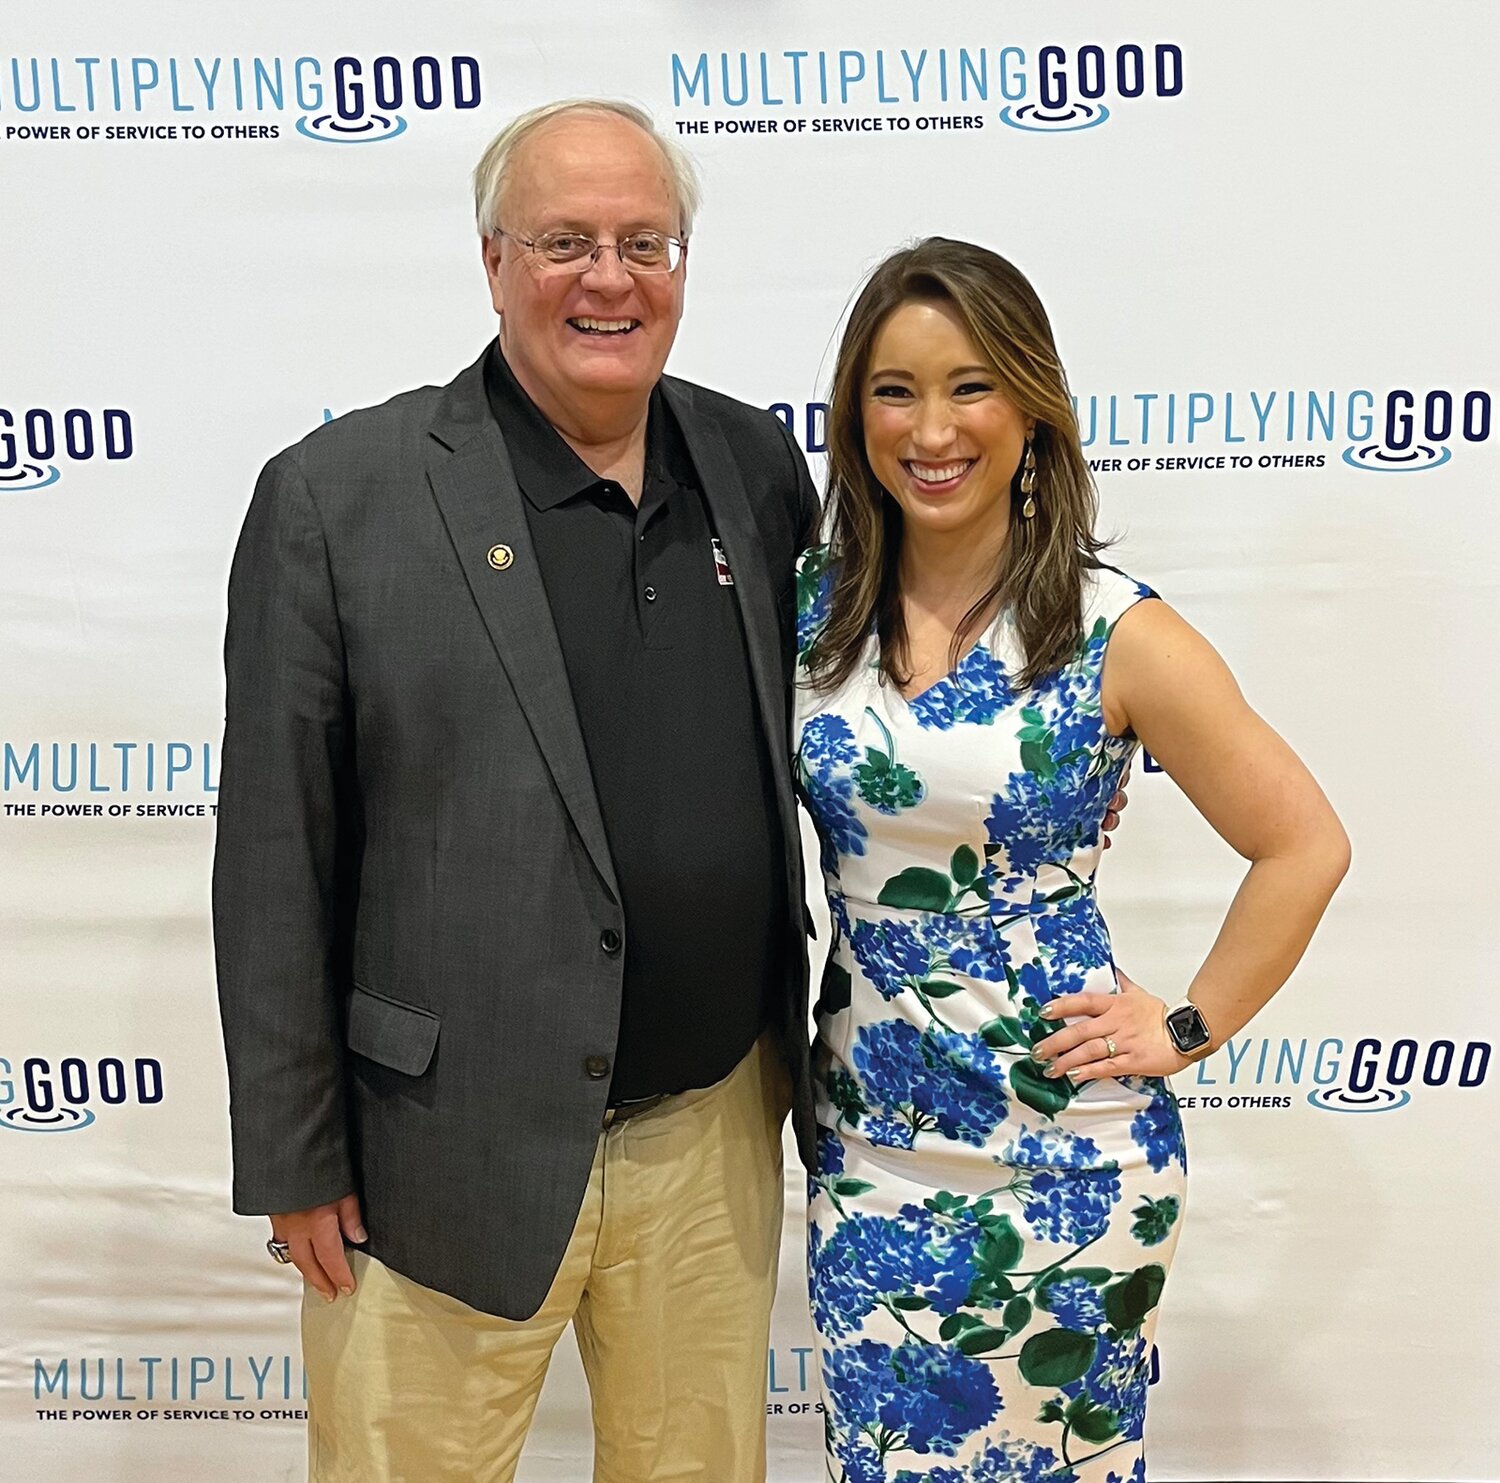 Photo Provided
Dr. Mark Eutsler and WRTV Anchor Megan Shinn.jpg
Caption—Dr. Mark Eutsler and WRTV Anchor Megan Shinn at a ChangeMakers-supported Students In Action service celebration event held at Union Campus in downtown Indianapolis.